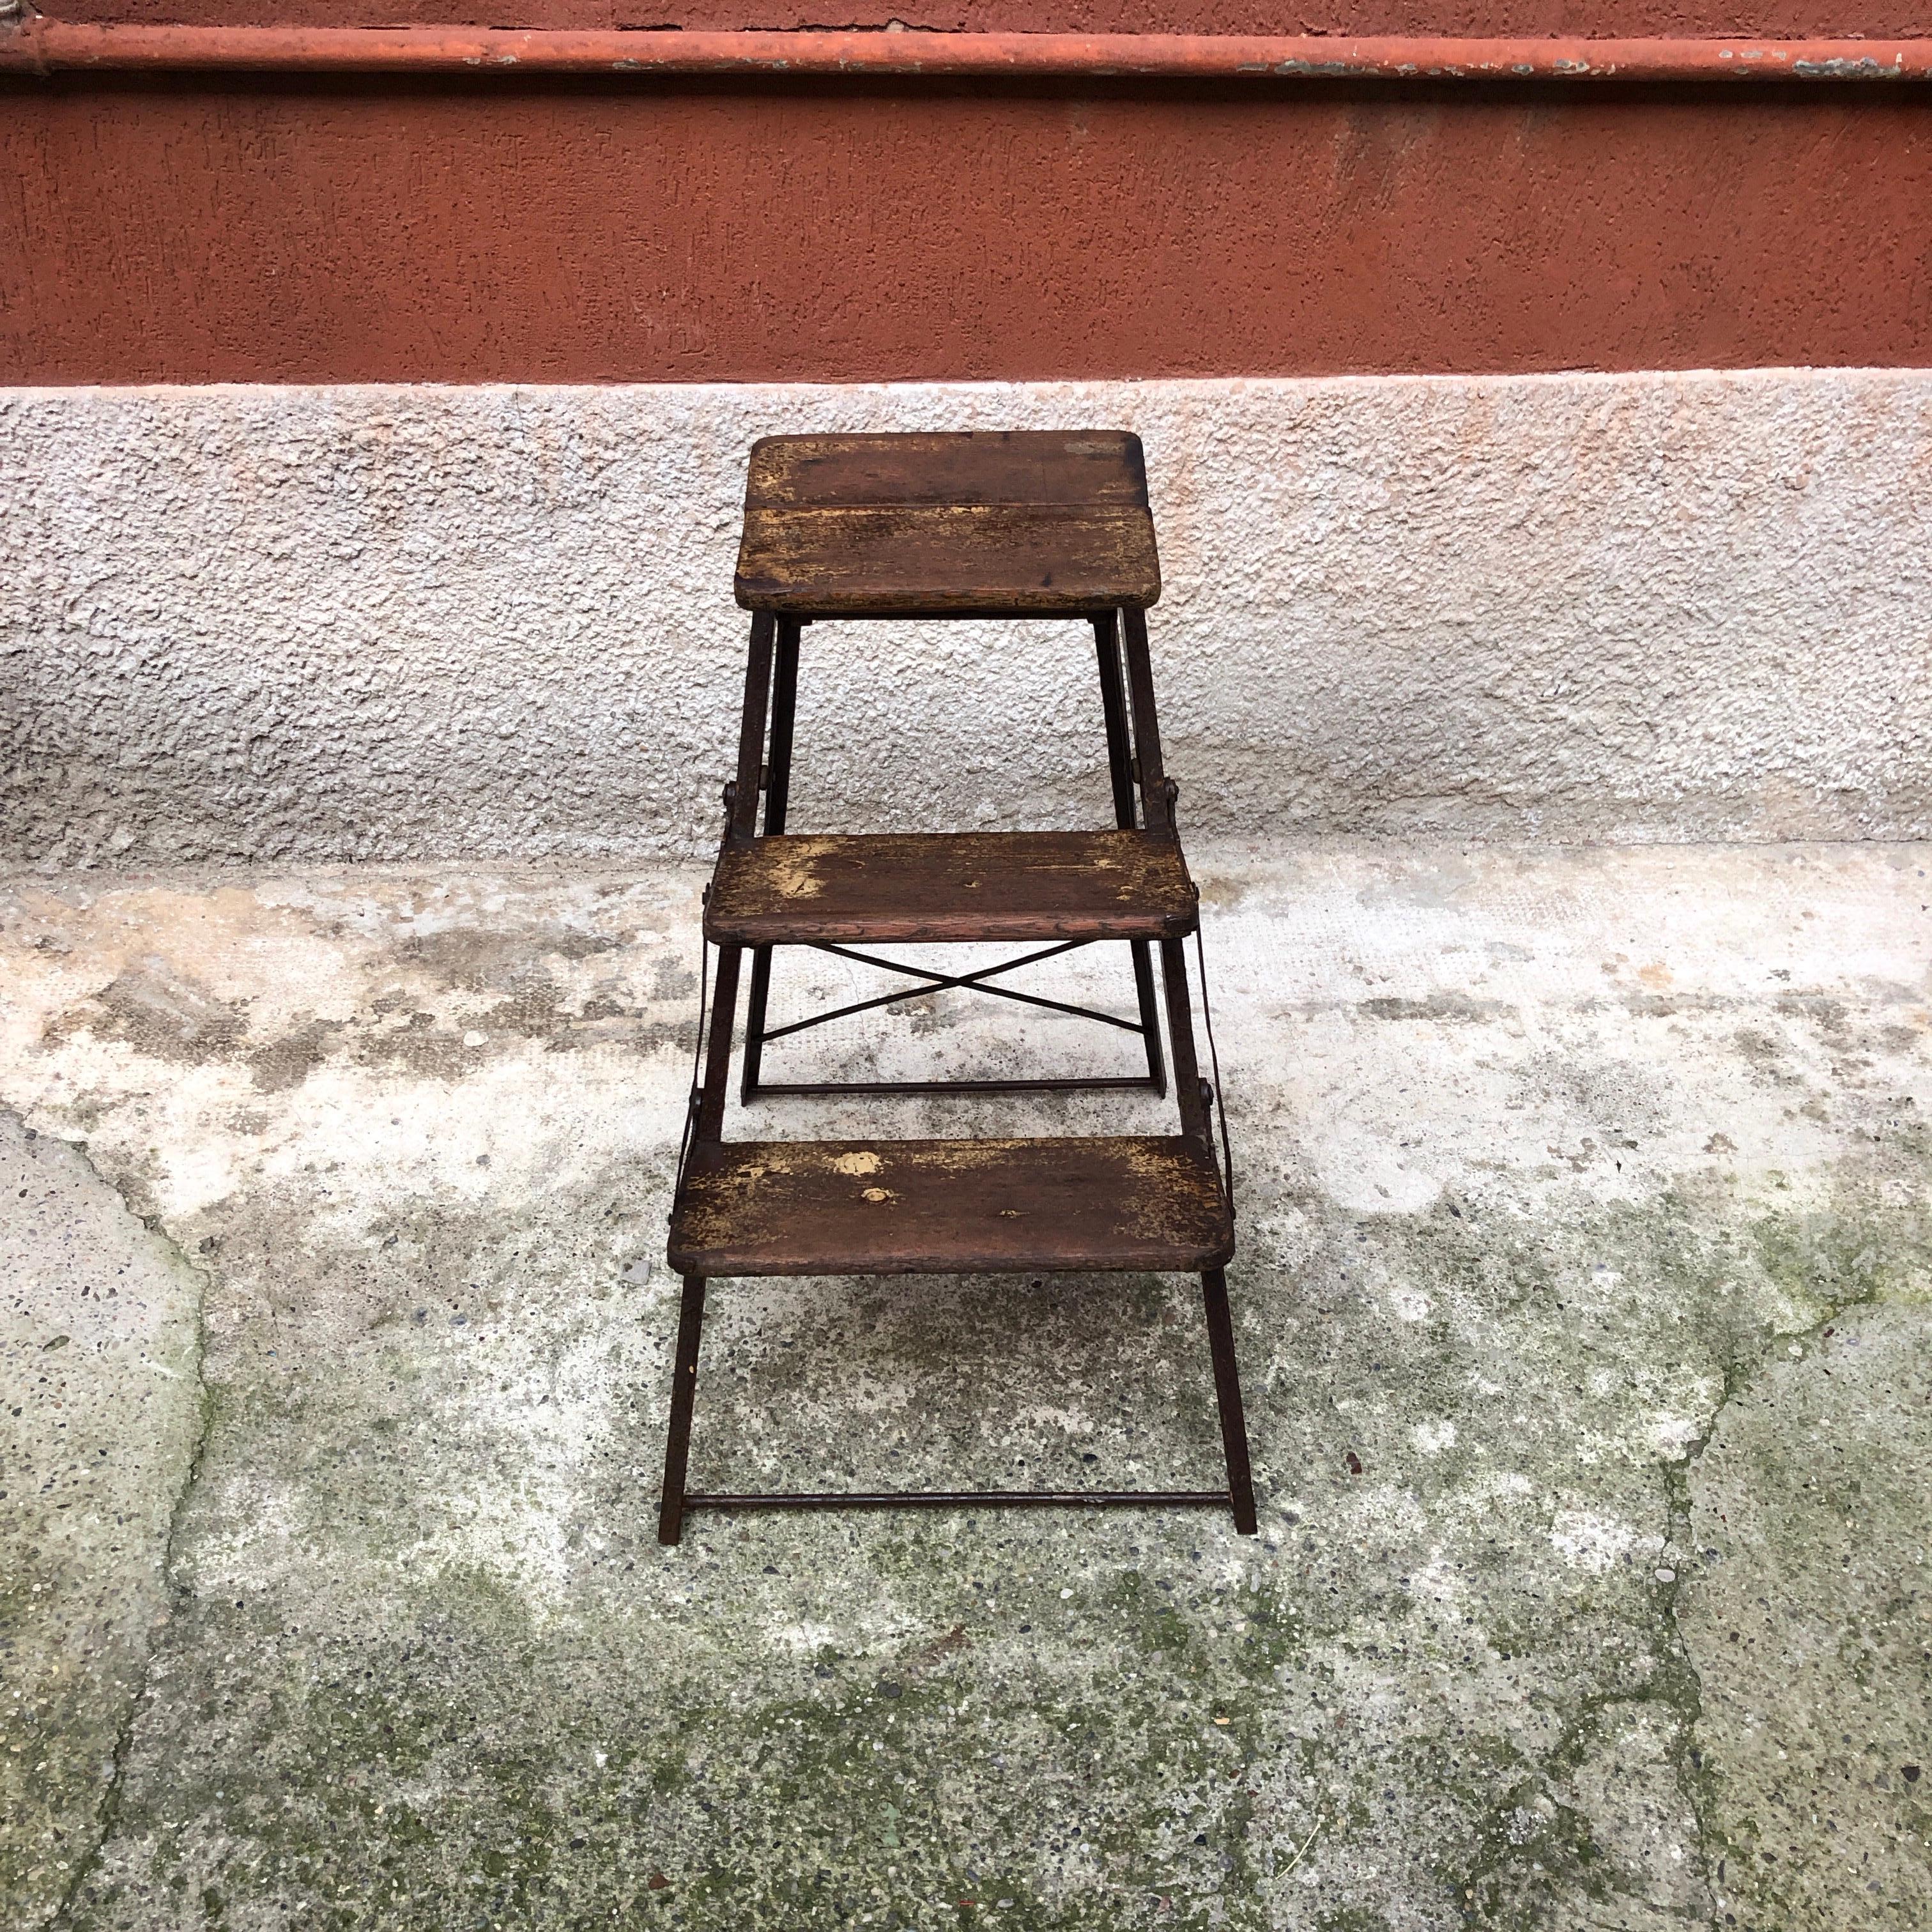 Italian folding iron and wood ladder, early 1900s
Italian folding ladder, in wrought iron, with iron hinges and solid wood steps
Early 1900s, vintage conditions.